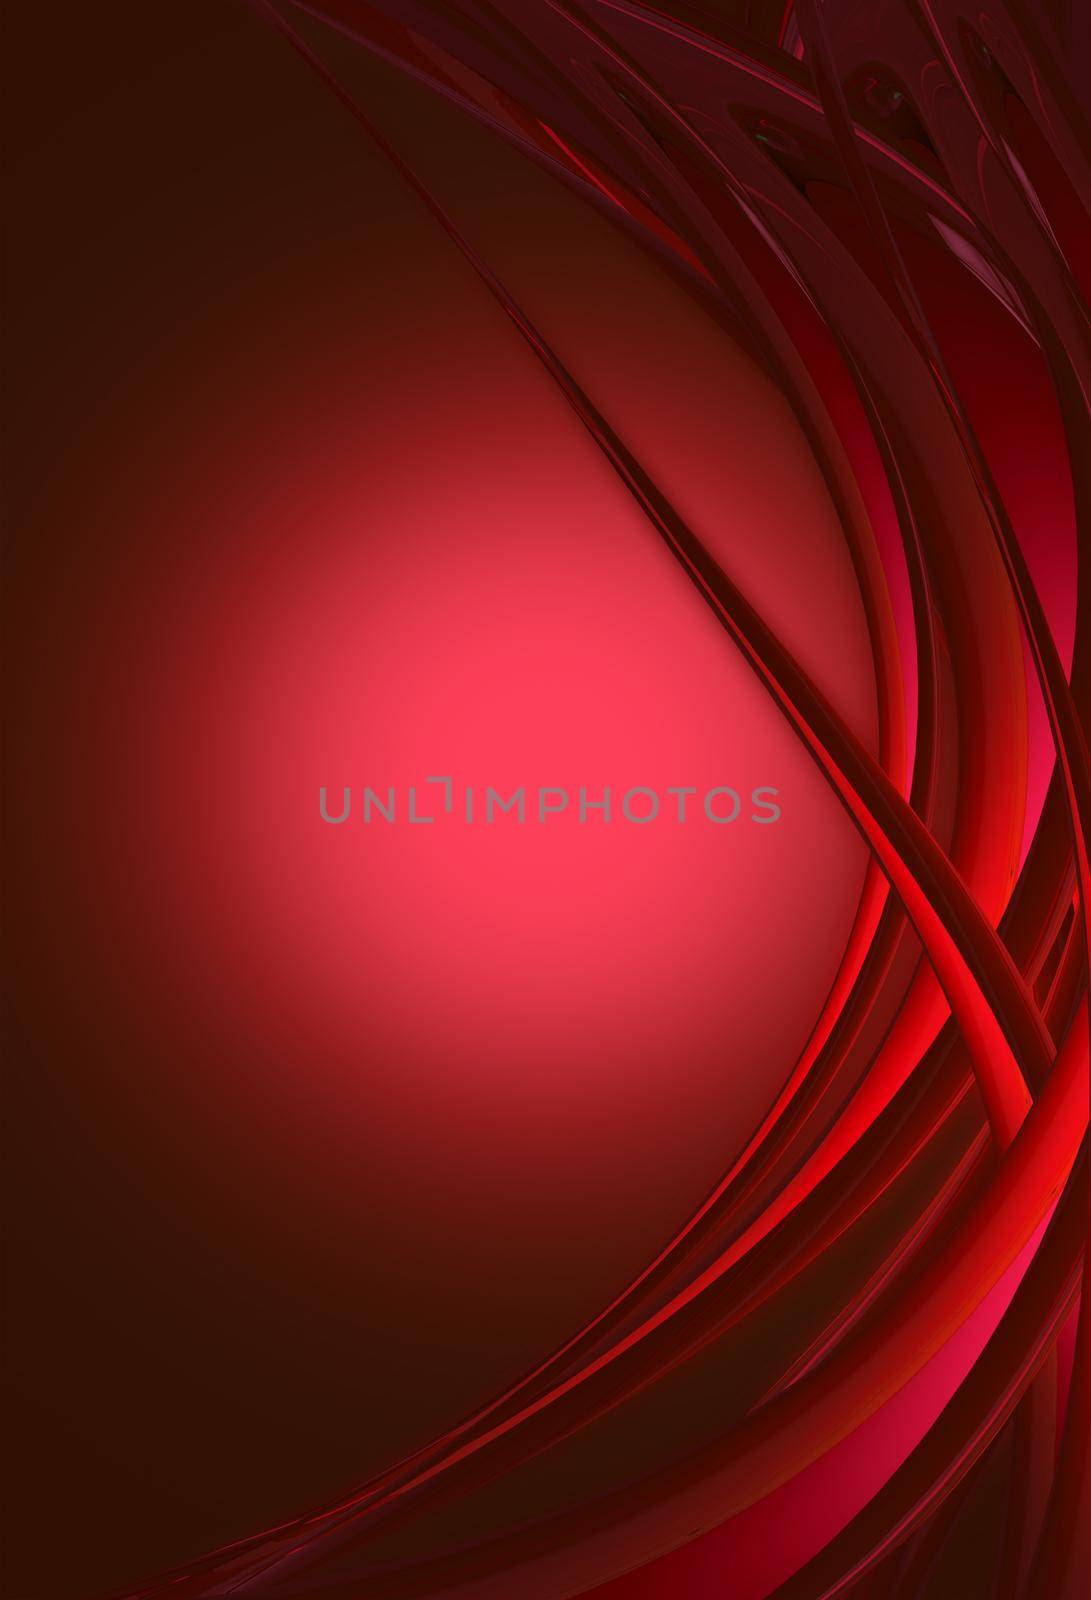 Dark Red Abstract Background with Abstract Wavy Ornaments. Vertical Abstract Design with Copy Space. by welcomia